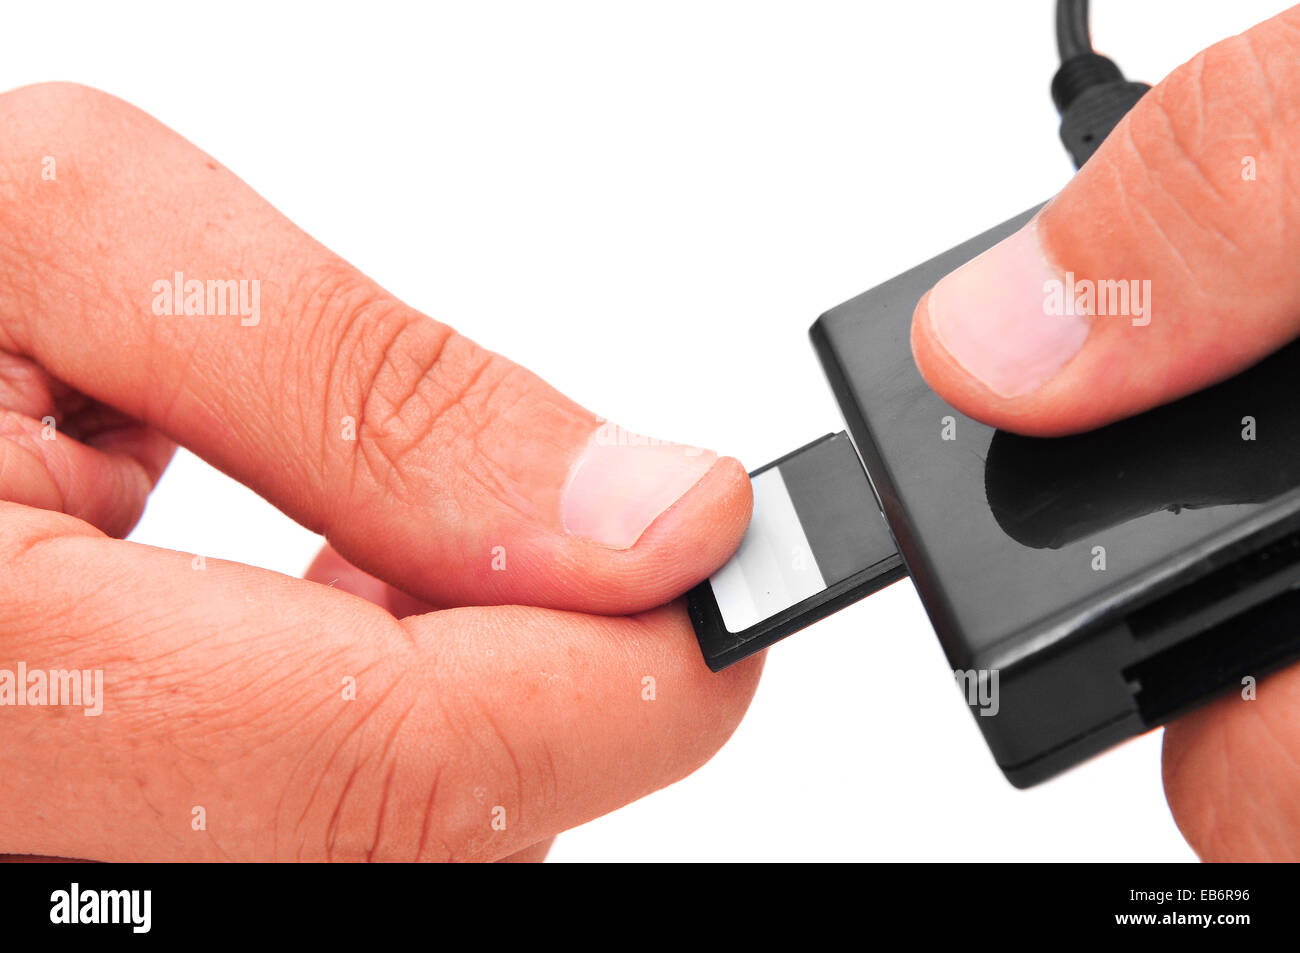 How to Insert a Memory Card into a Card Reader